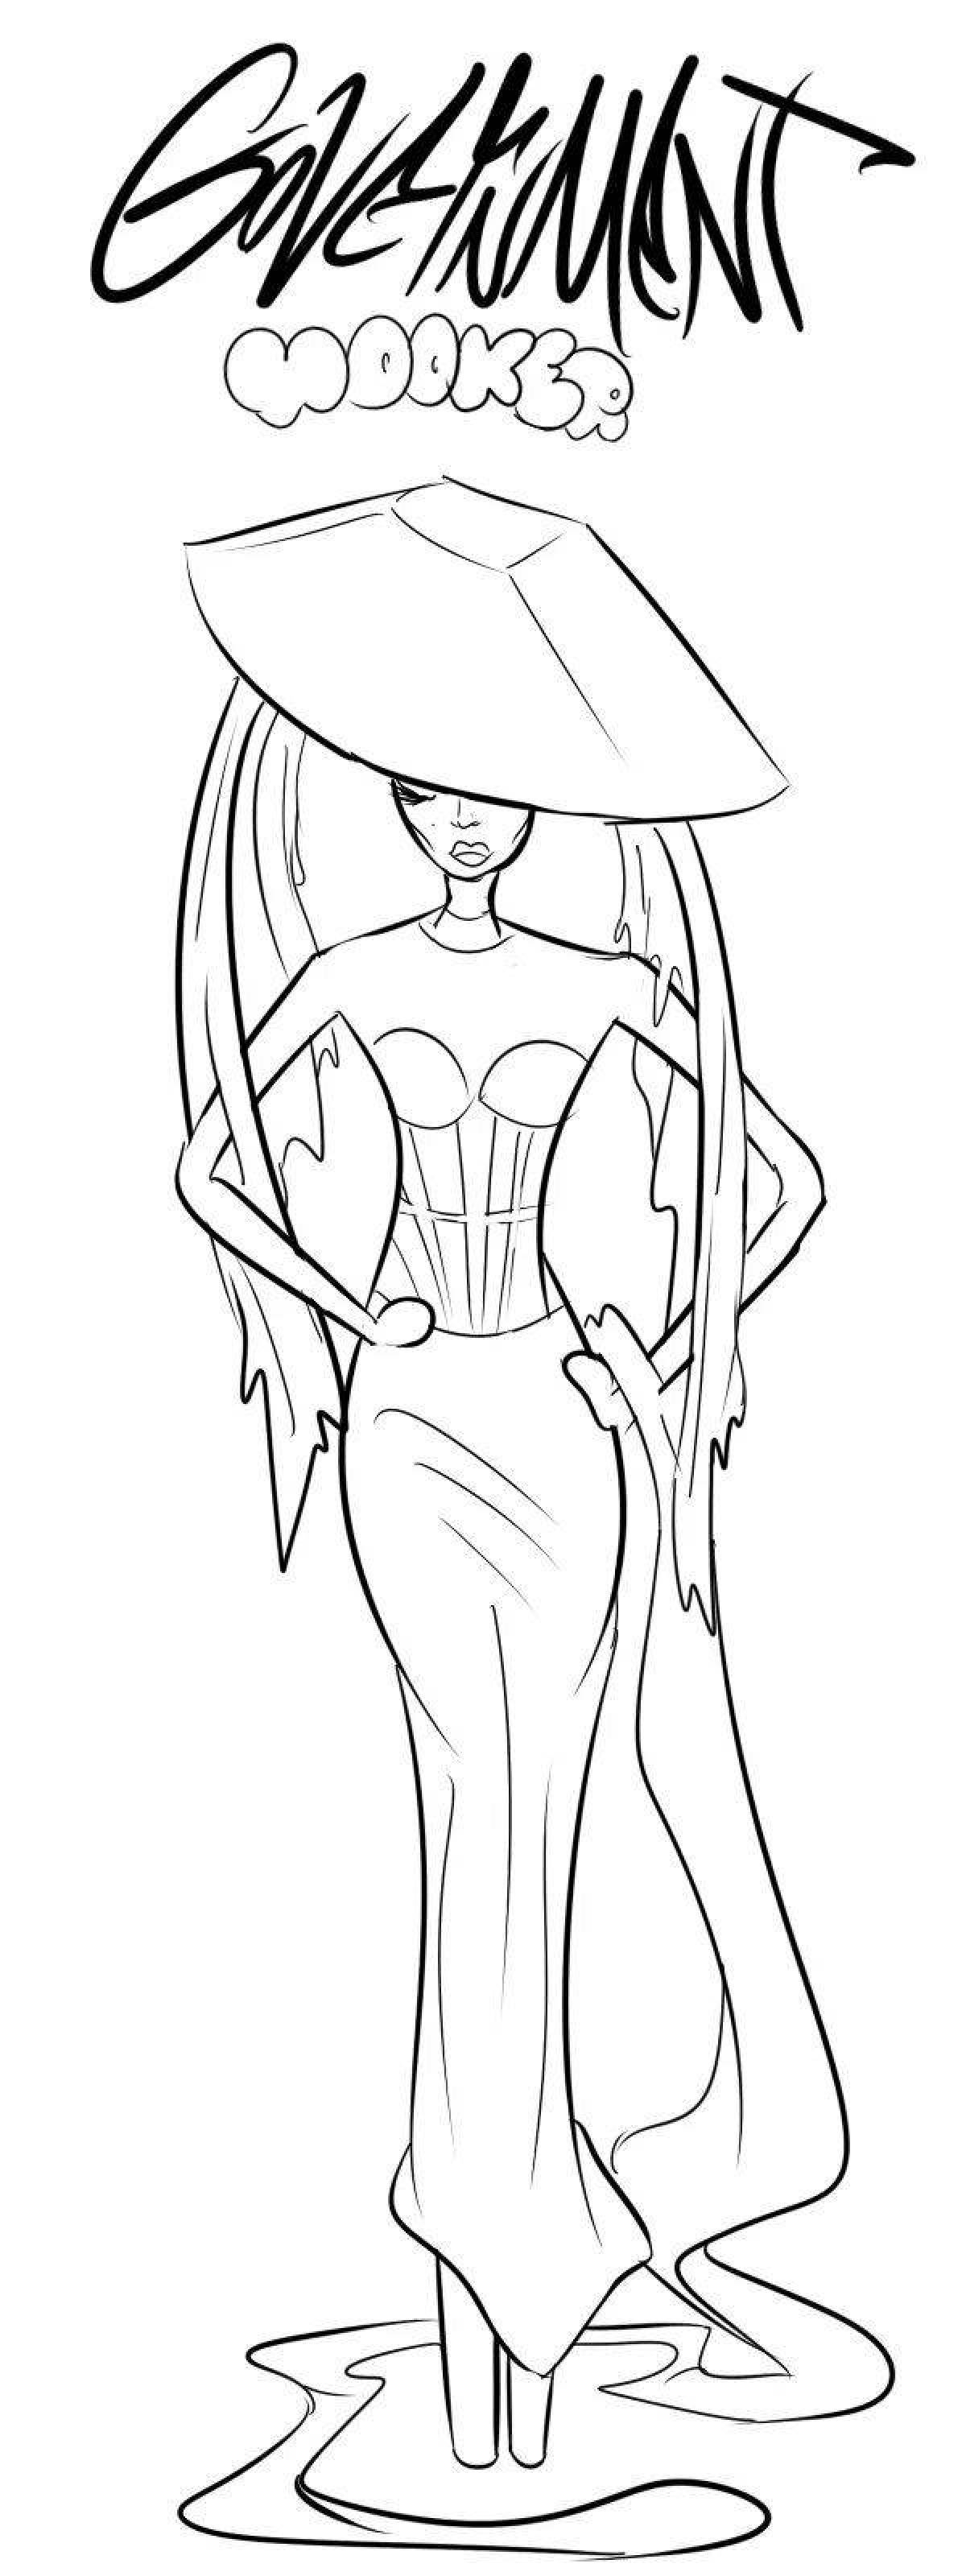 Coloring page animated lady gaga